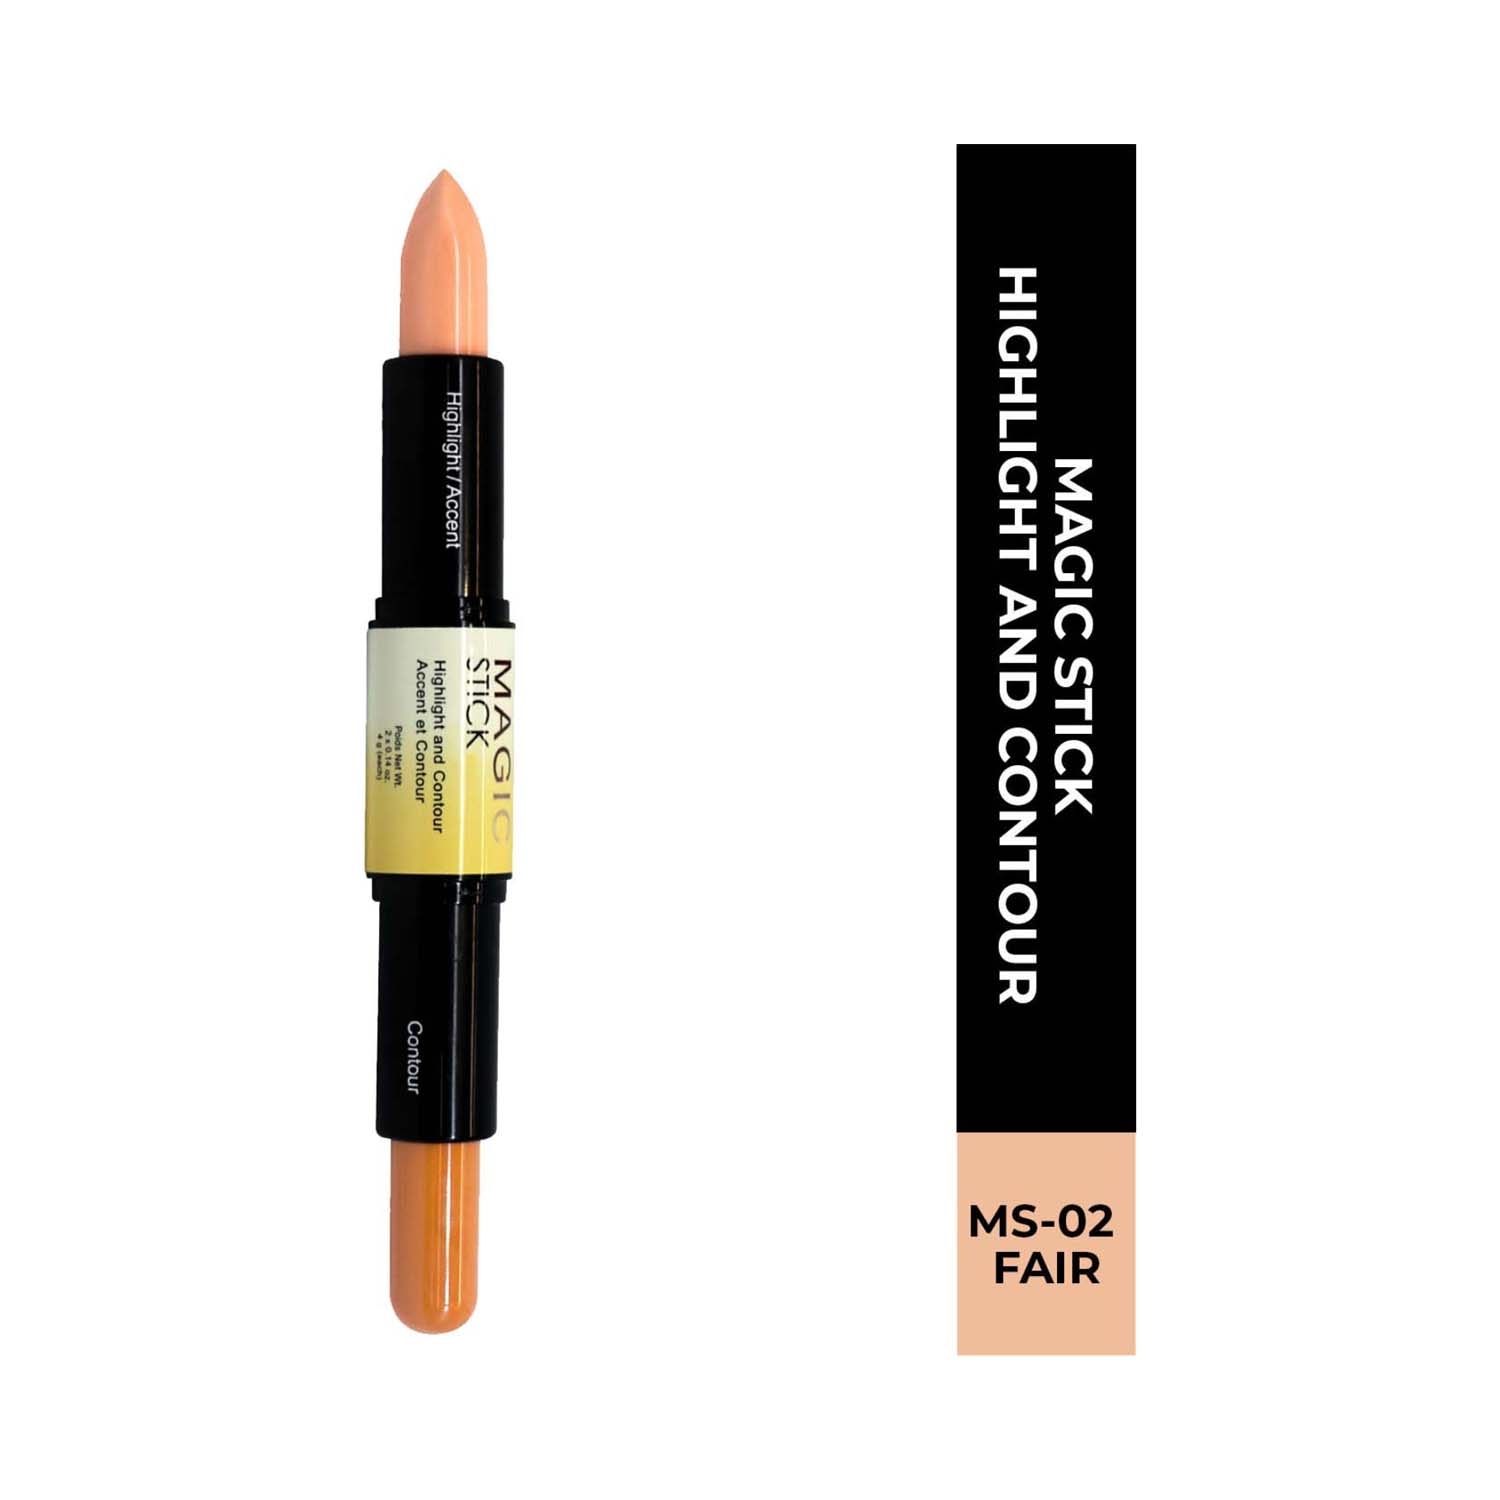 Half N Half 2-In-1 Cover Perfection Highlight And Contour Magic Stick - 02 Fair (8g)